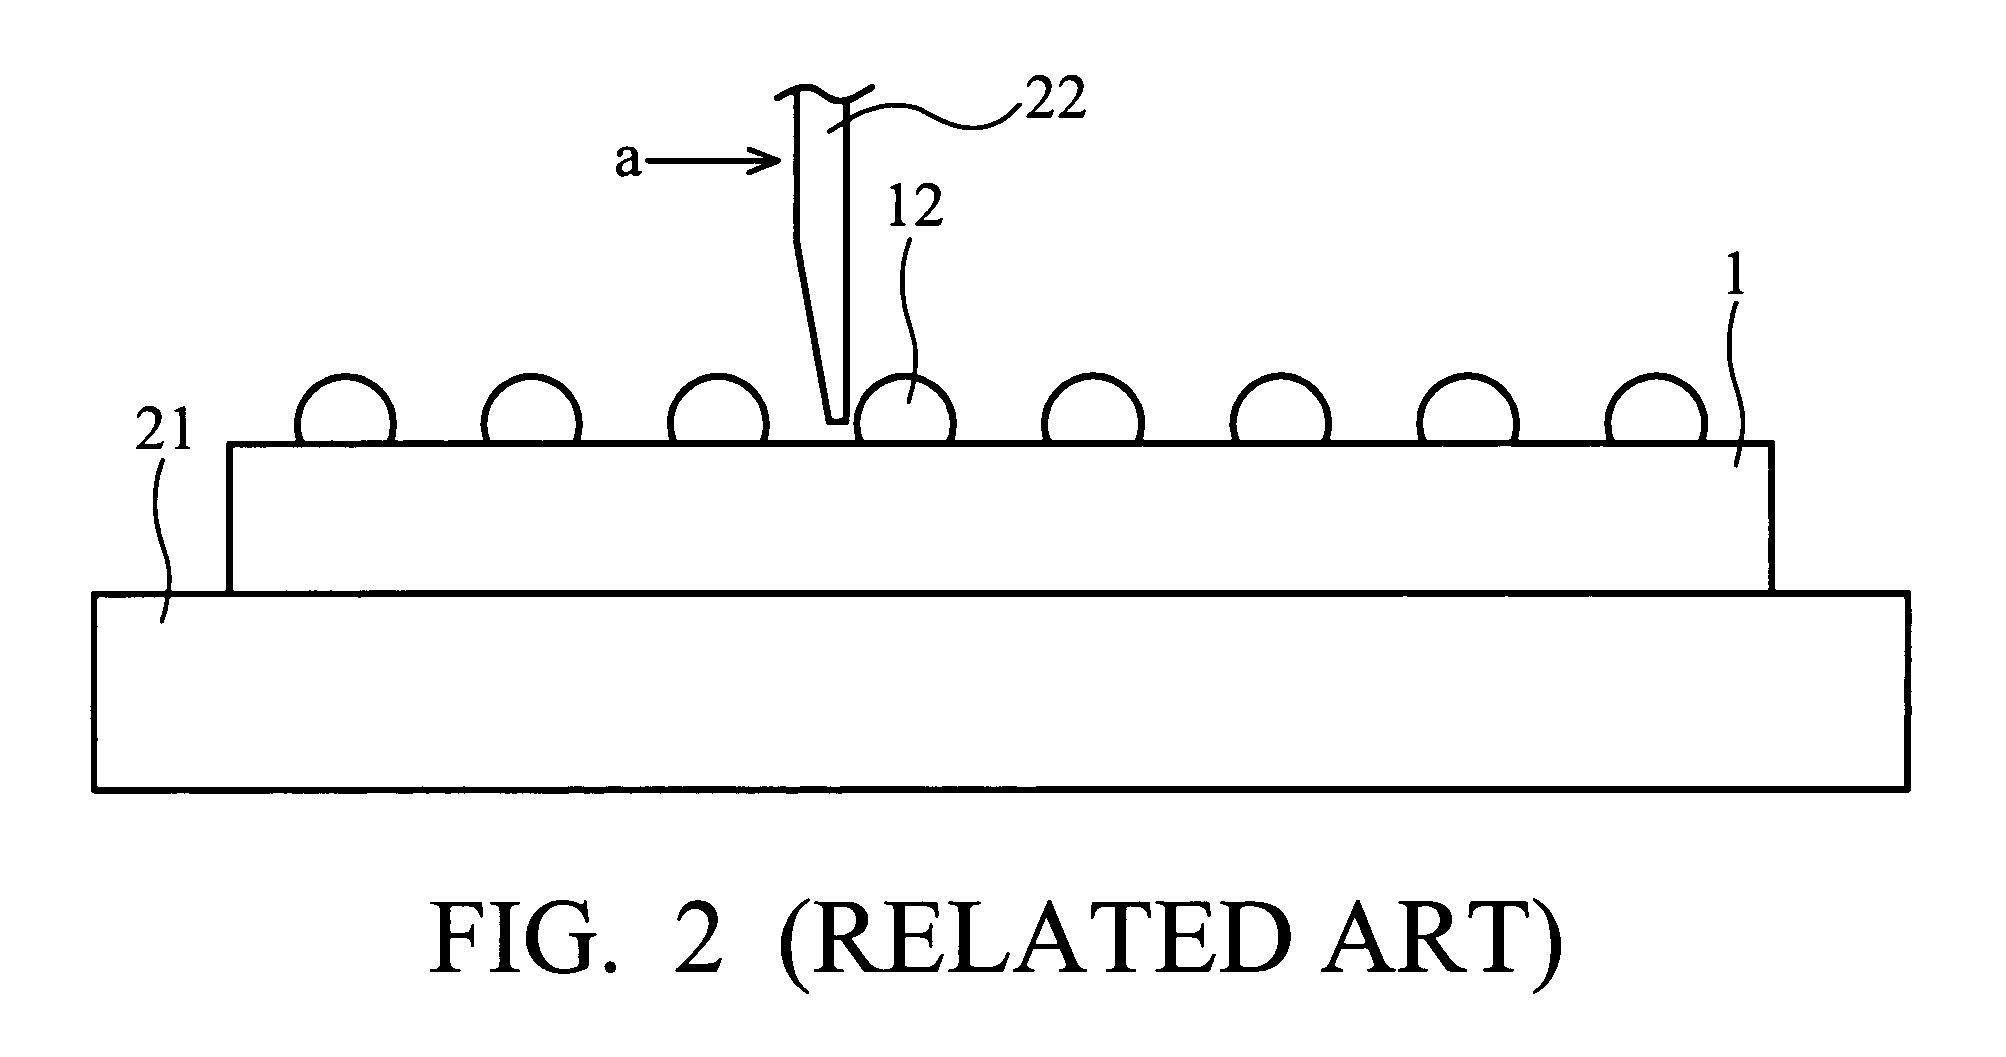 Apparatus for shear testing bonds on silicon substrate